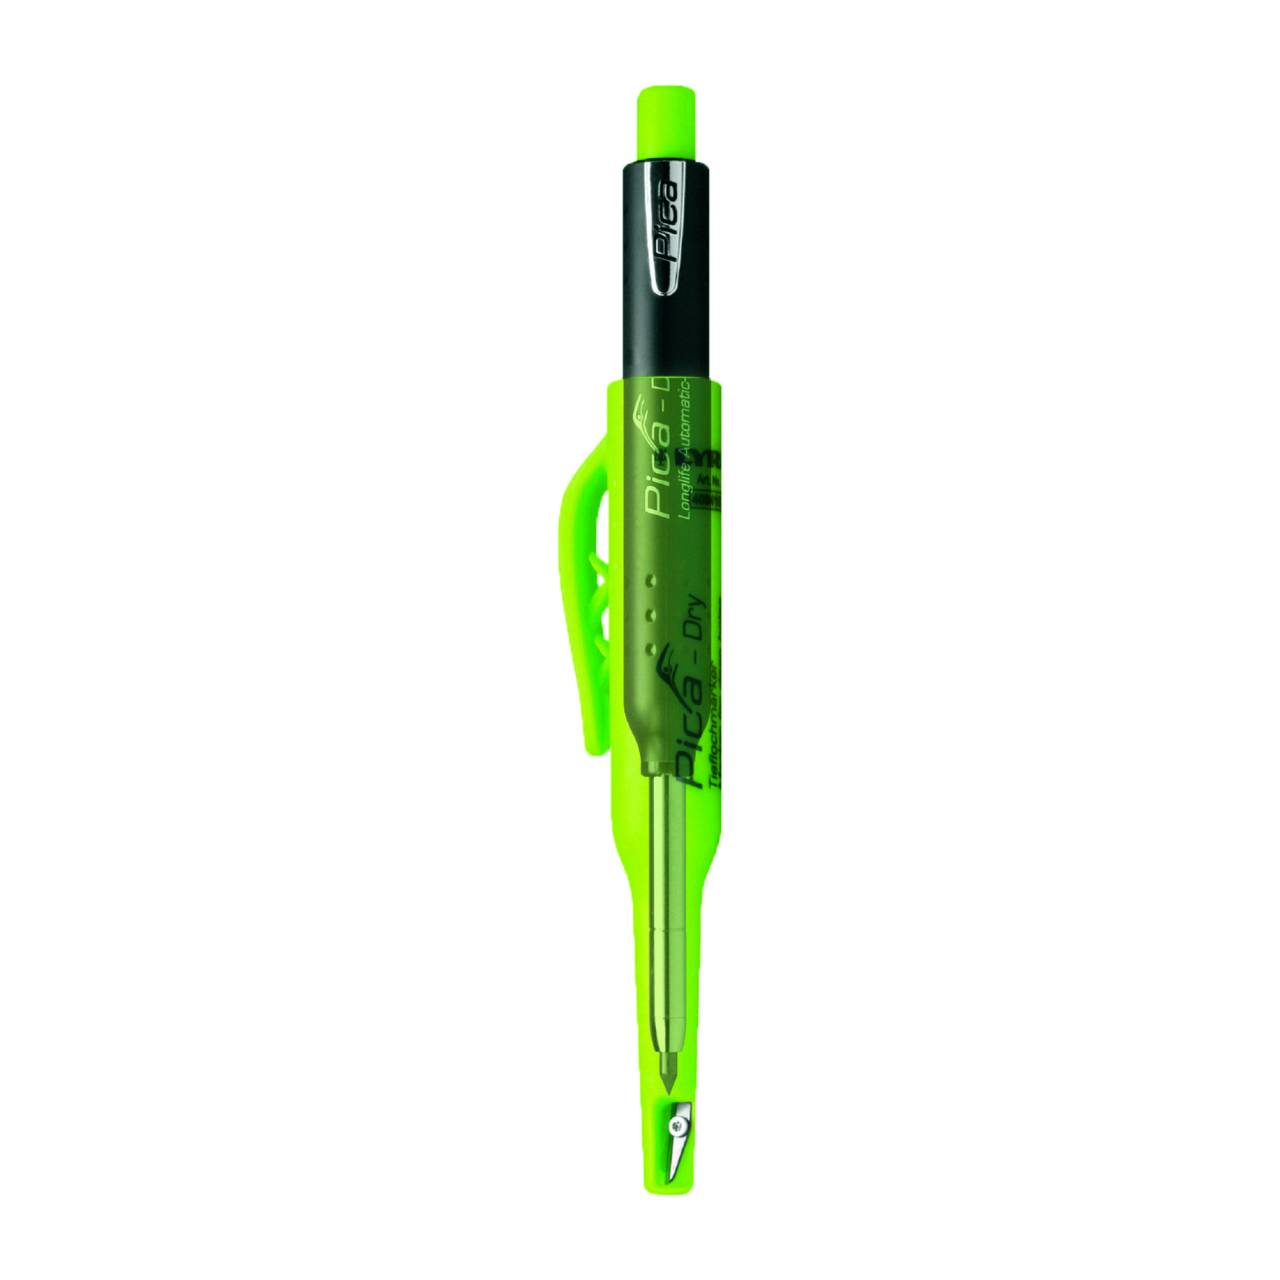 PICA®-DRY' Longlife Automatic Pen / professioneller Baumarker